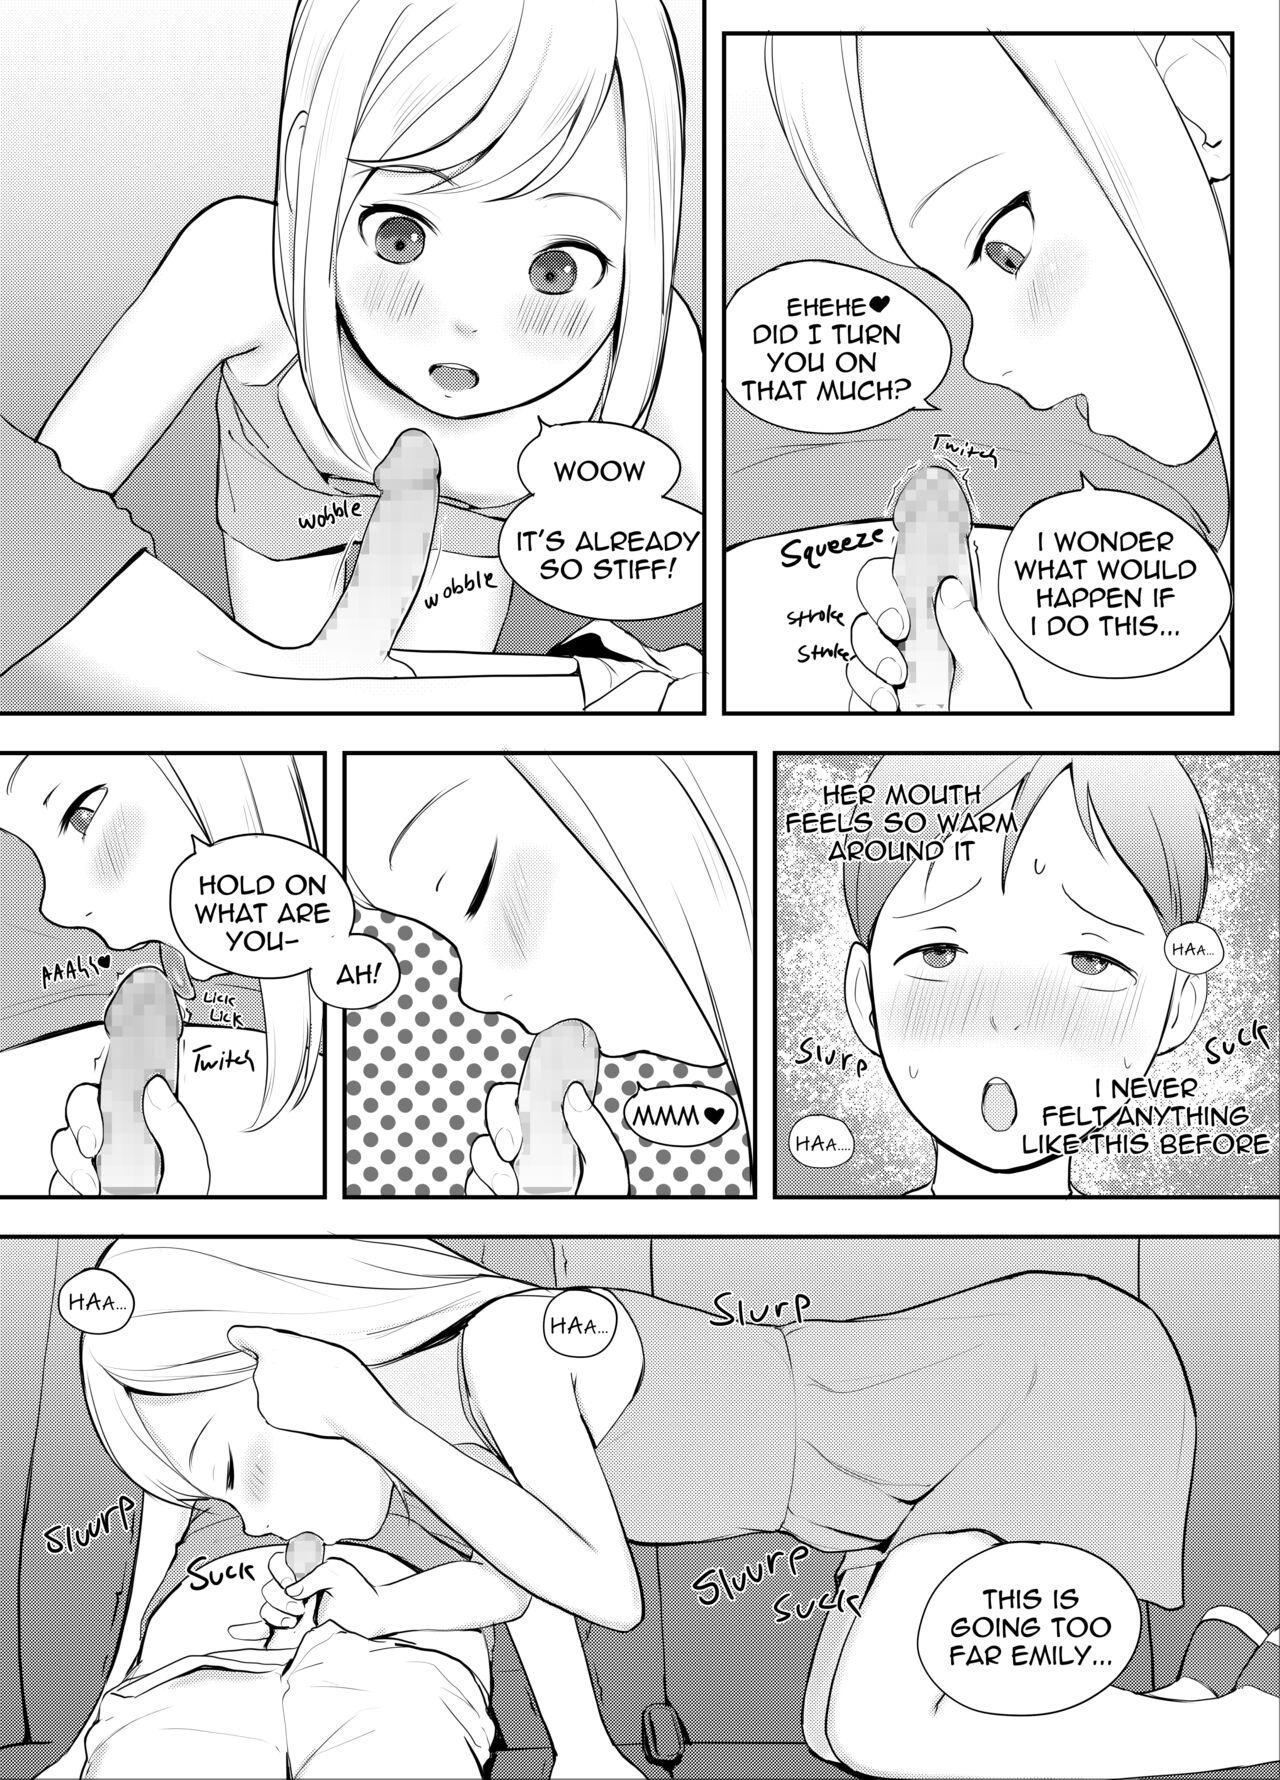 Blowjob Passing the Time - Original Fucking - Page 9